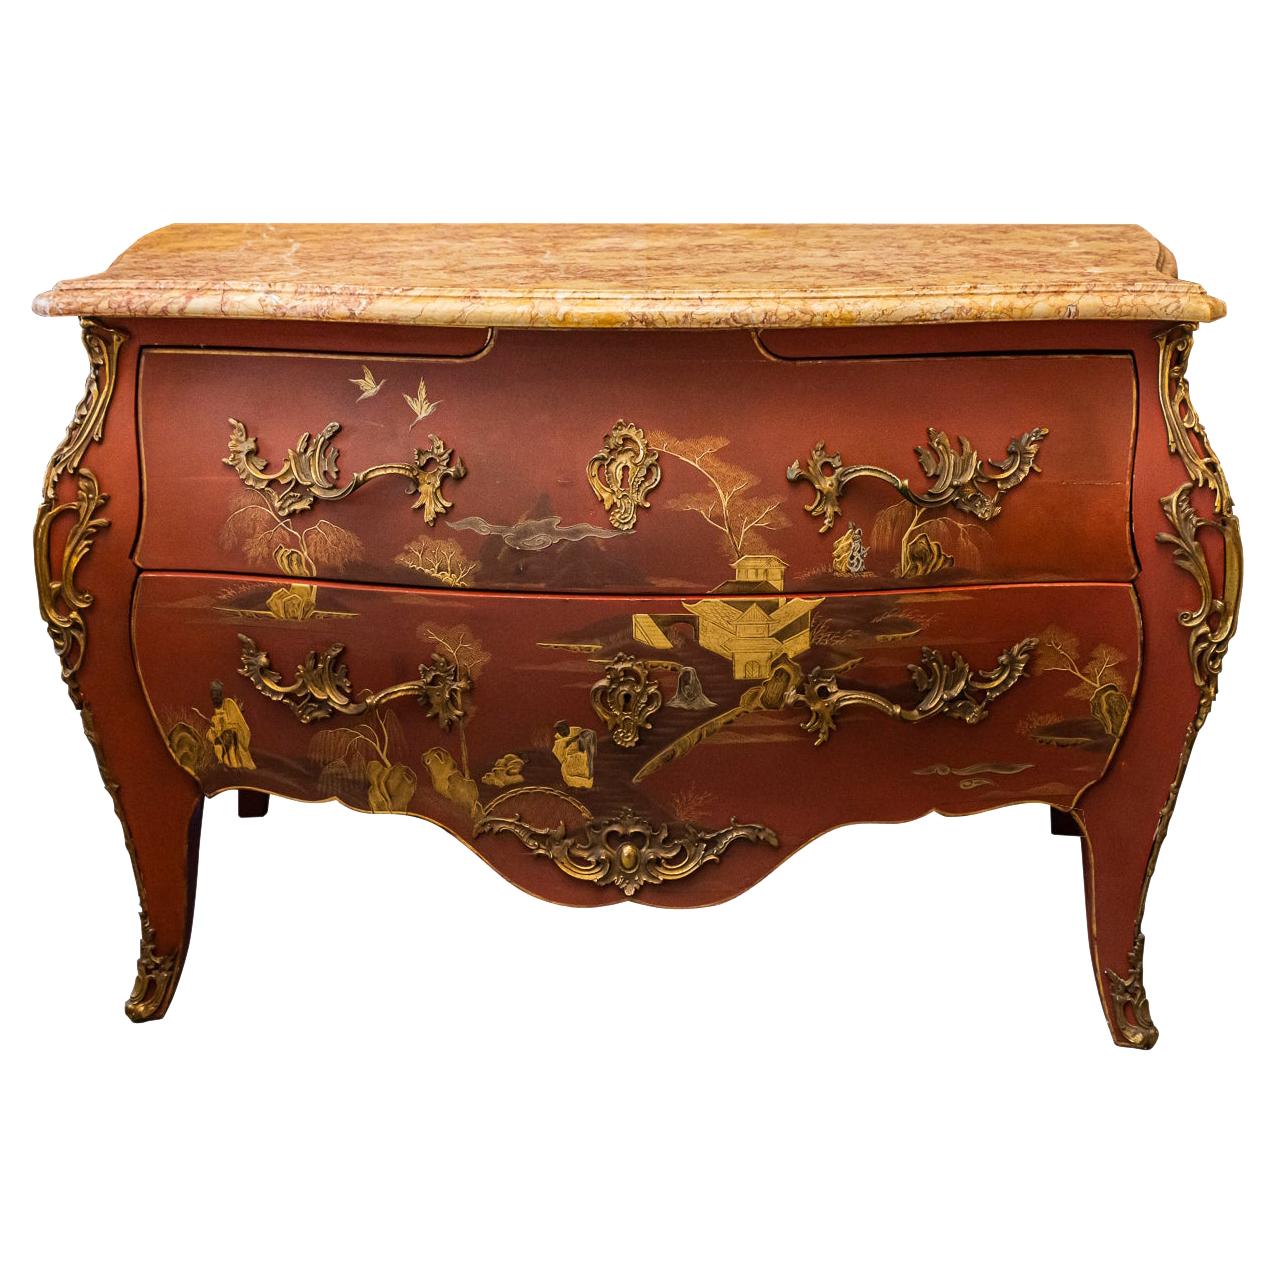 Maison Jansen, Sideboard in the Style of Louis XV, France, circa 1950